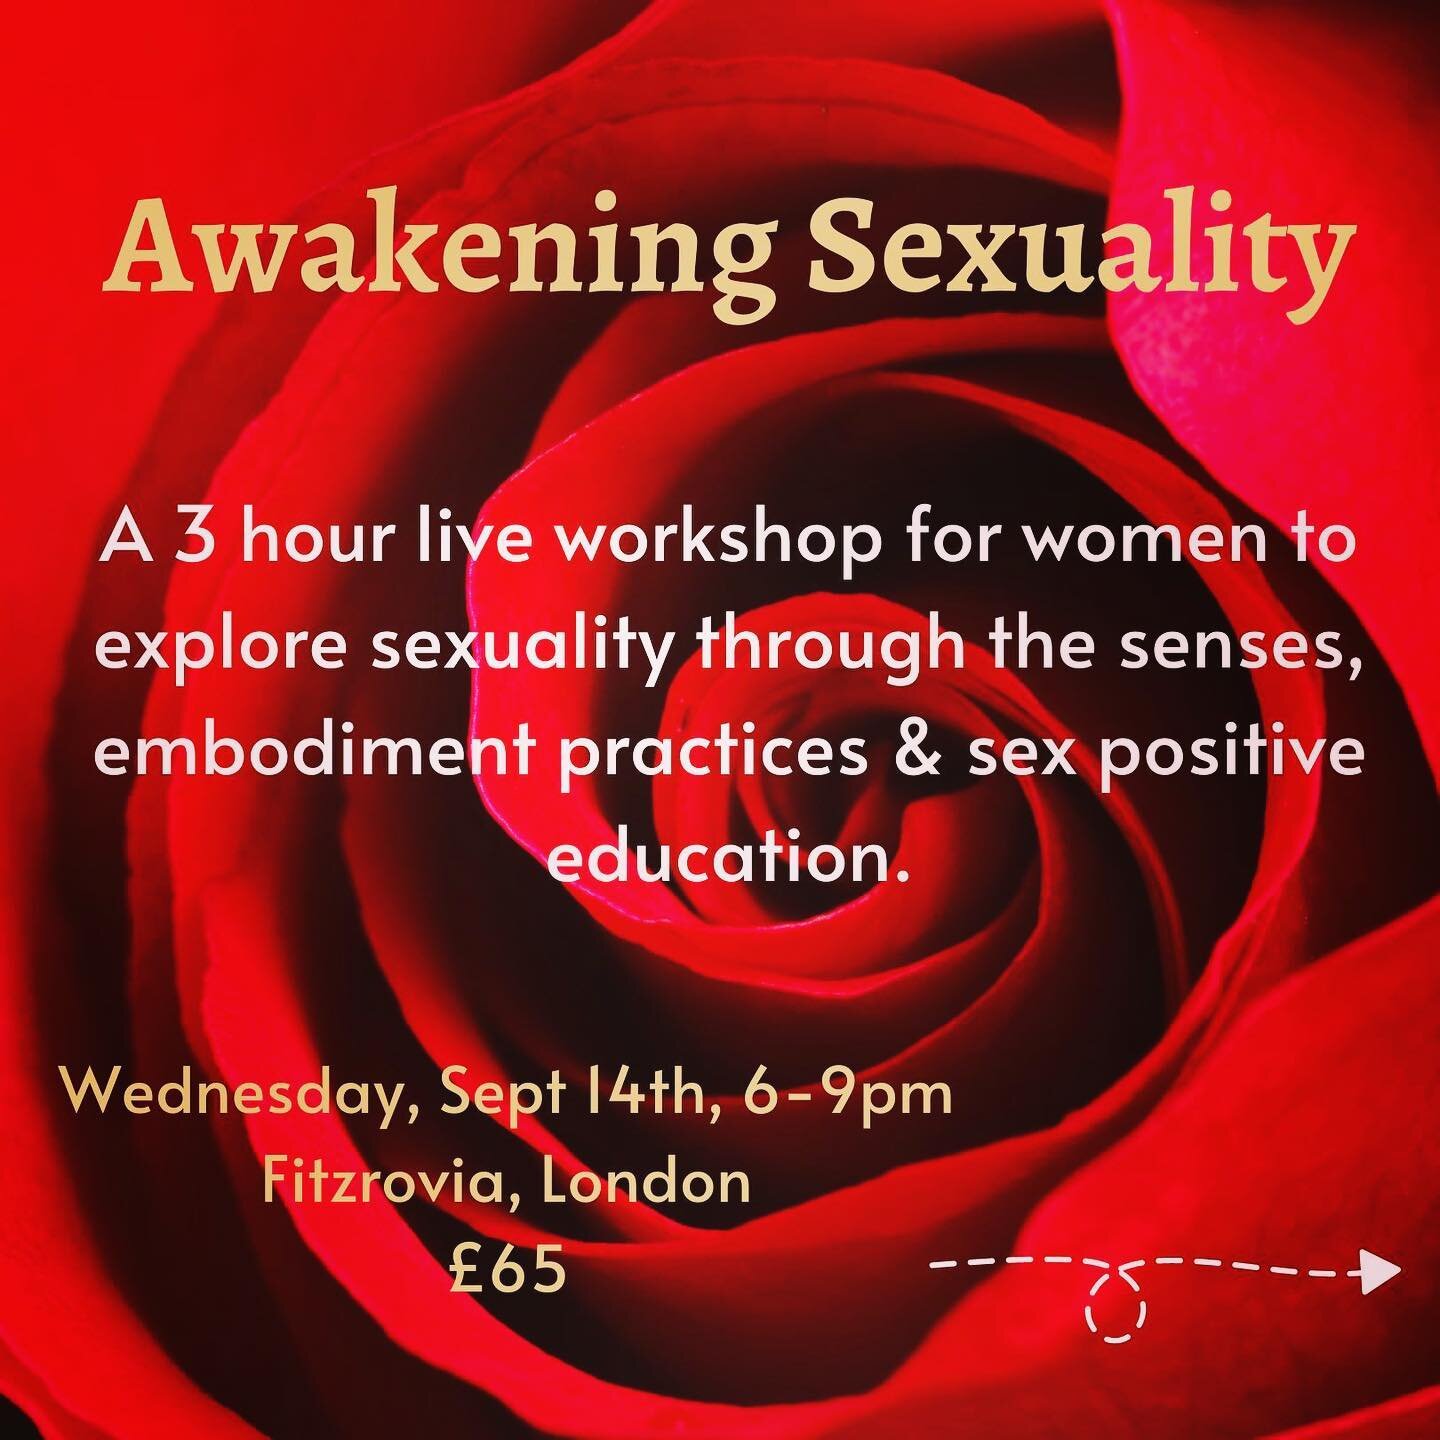 Upcoming in-person event in London - in collaboration with fellow practitioner / Sister (Victoria Kearns)🌟

During the 3 hour event we&rsquo;ll be exploring what sexuality means to you and how you can connect more deeply to this primal, powerful &am